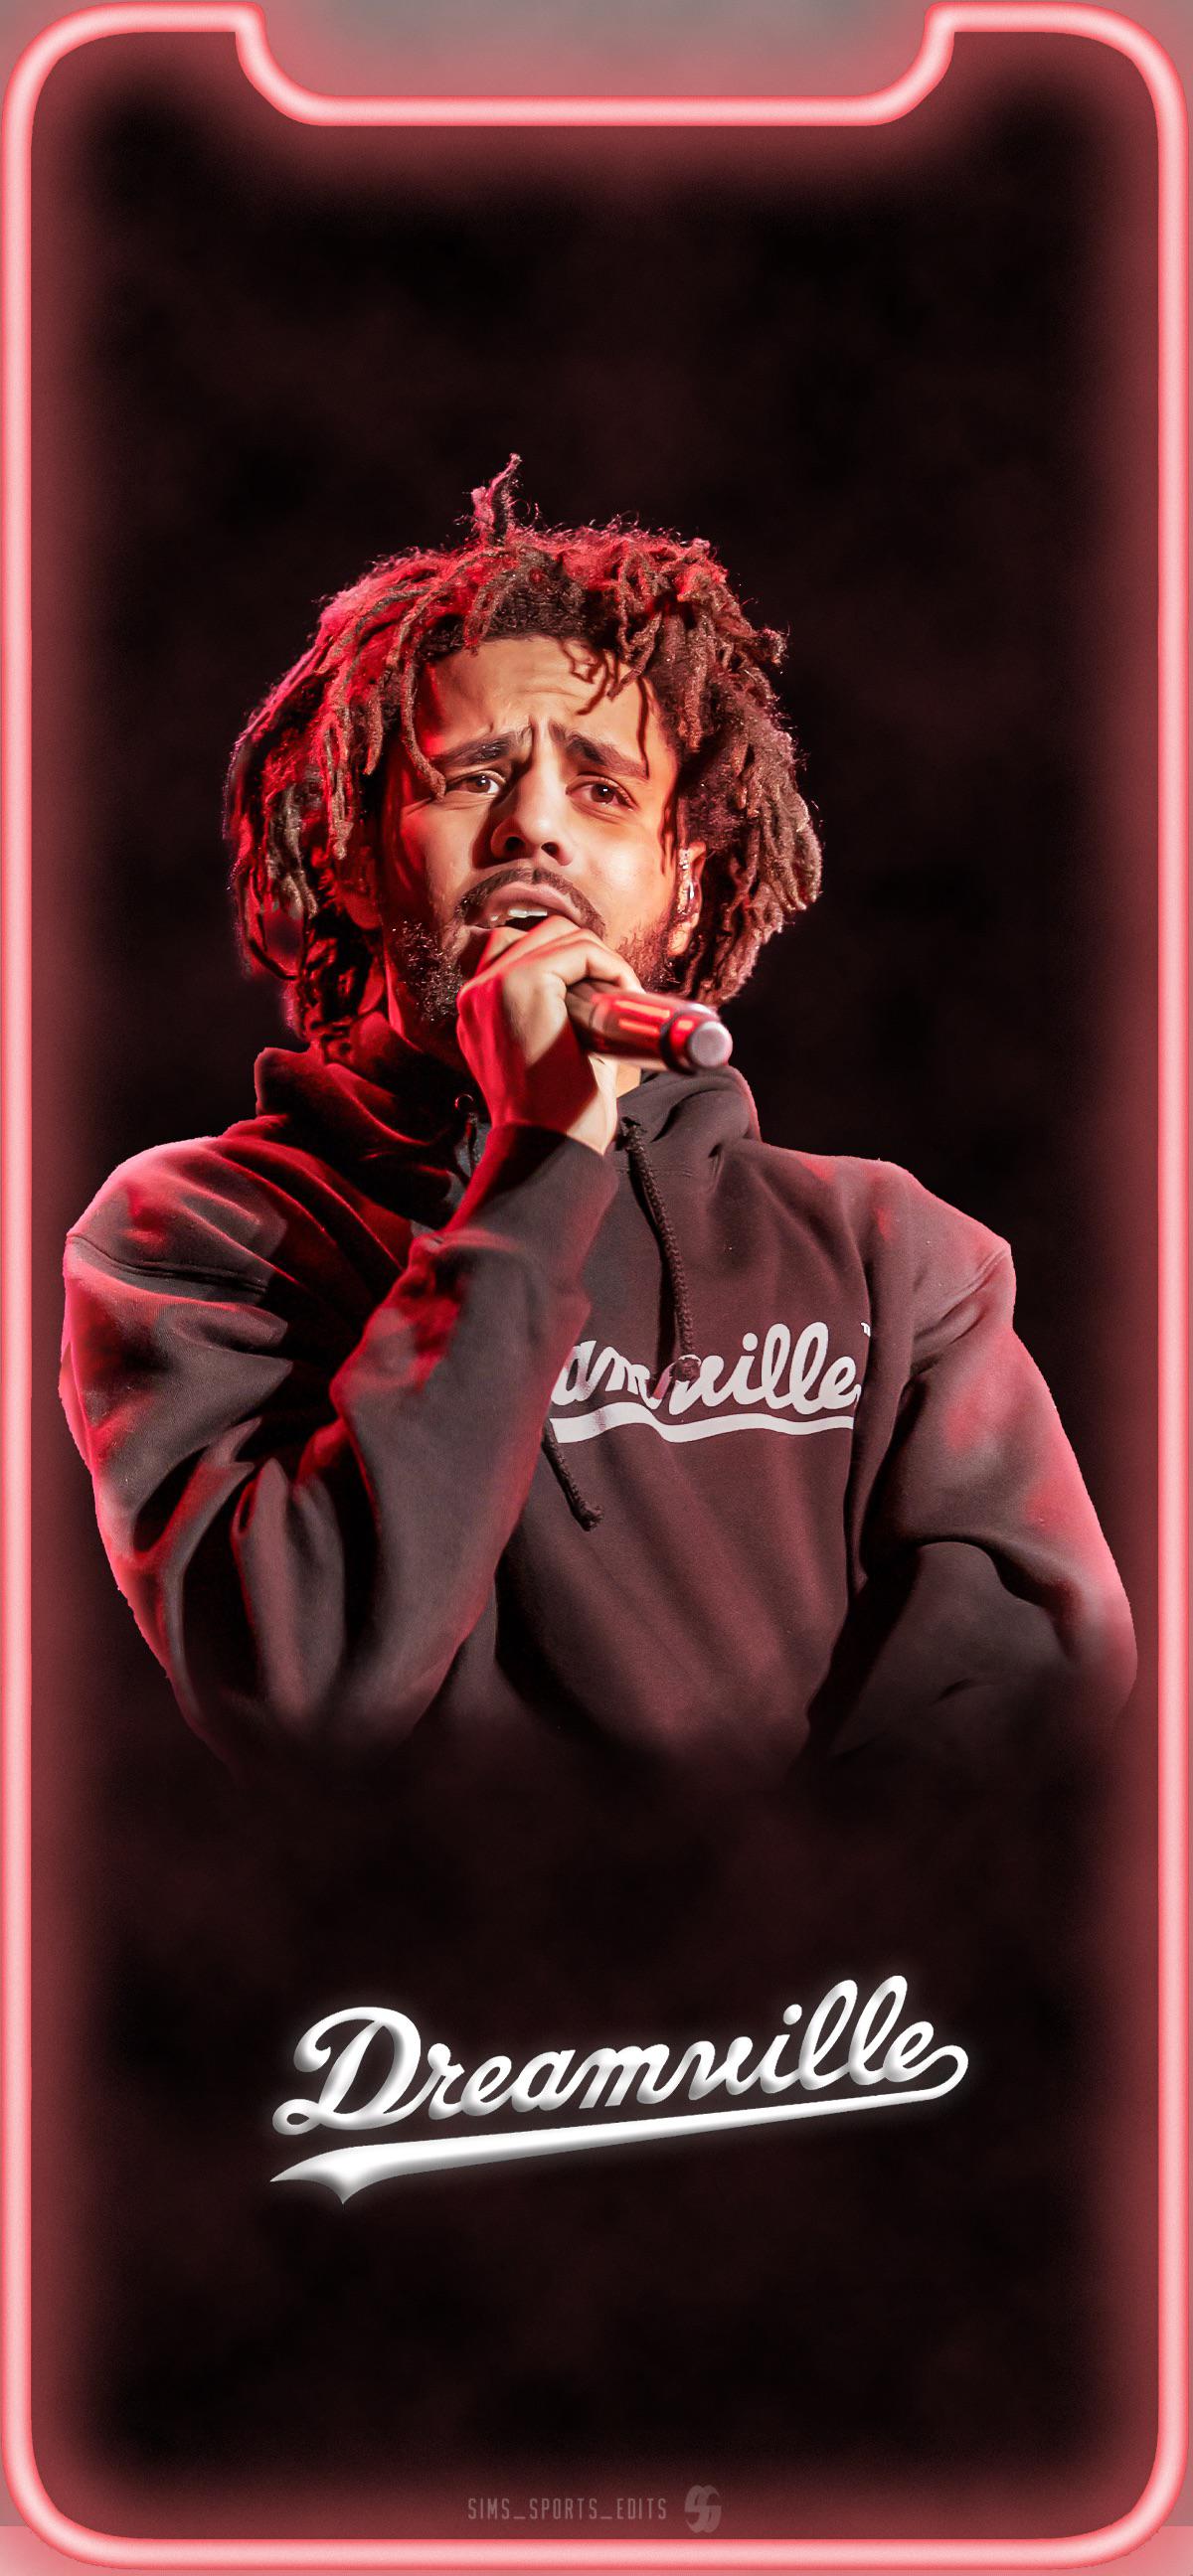 Here S An iPhone Wallpaper I Made Of The Goat R Jcole